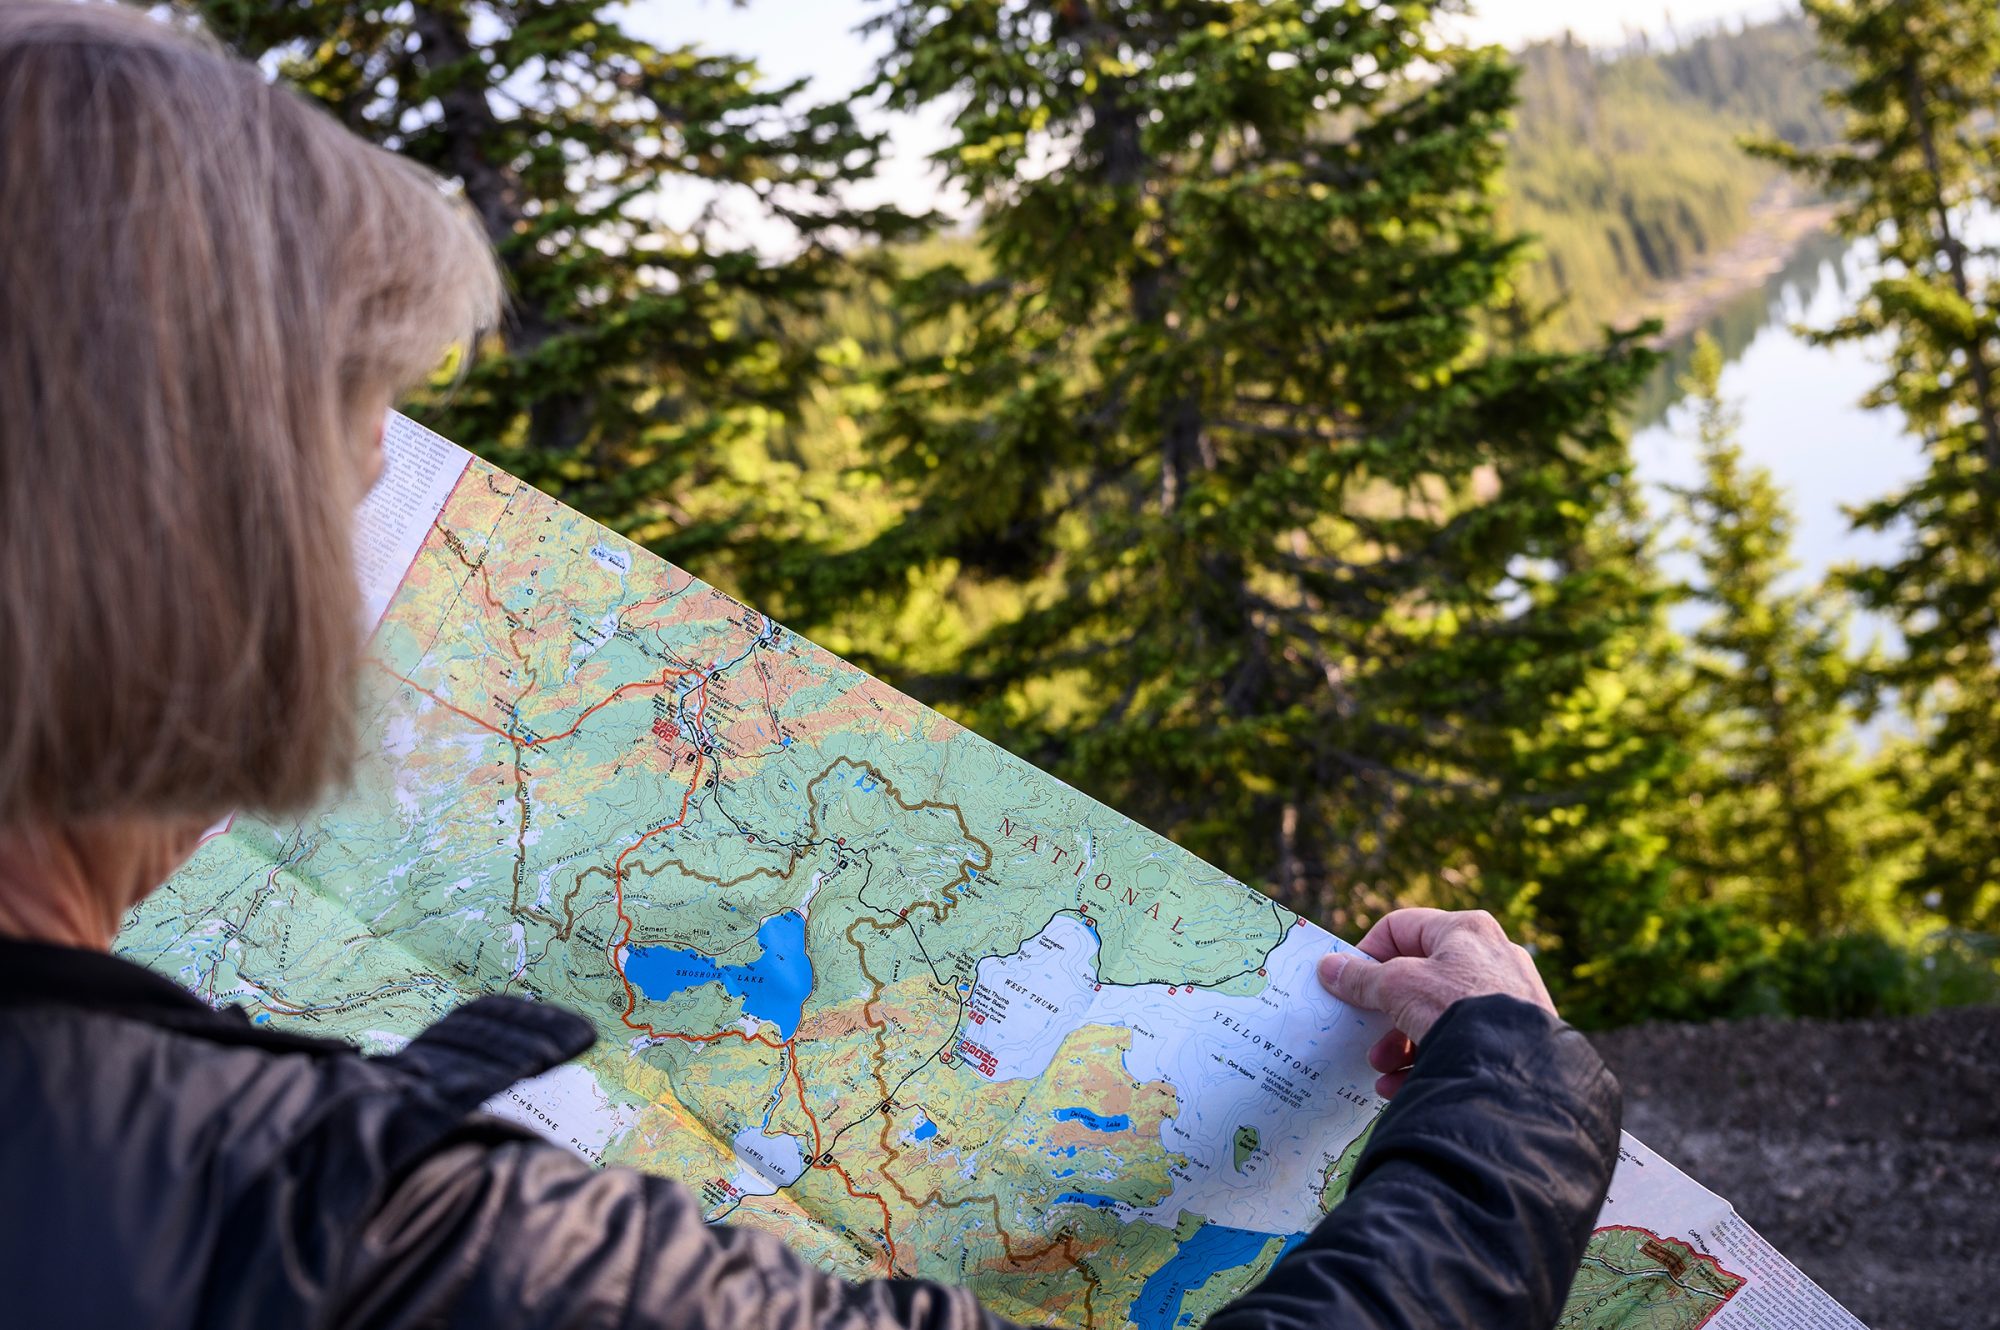 A woman holds up a map while a lake surrounded by evergreen trees is seen in the background.